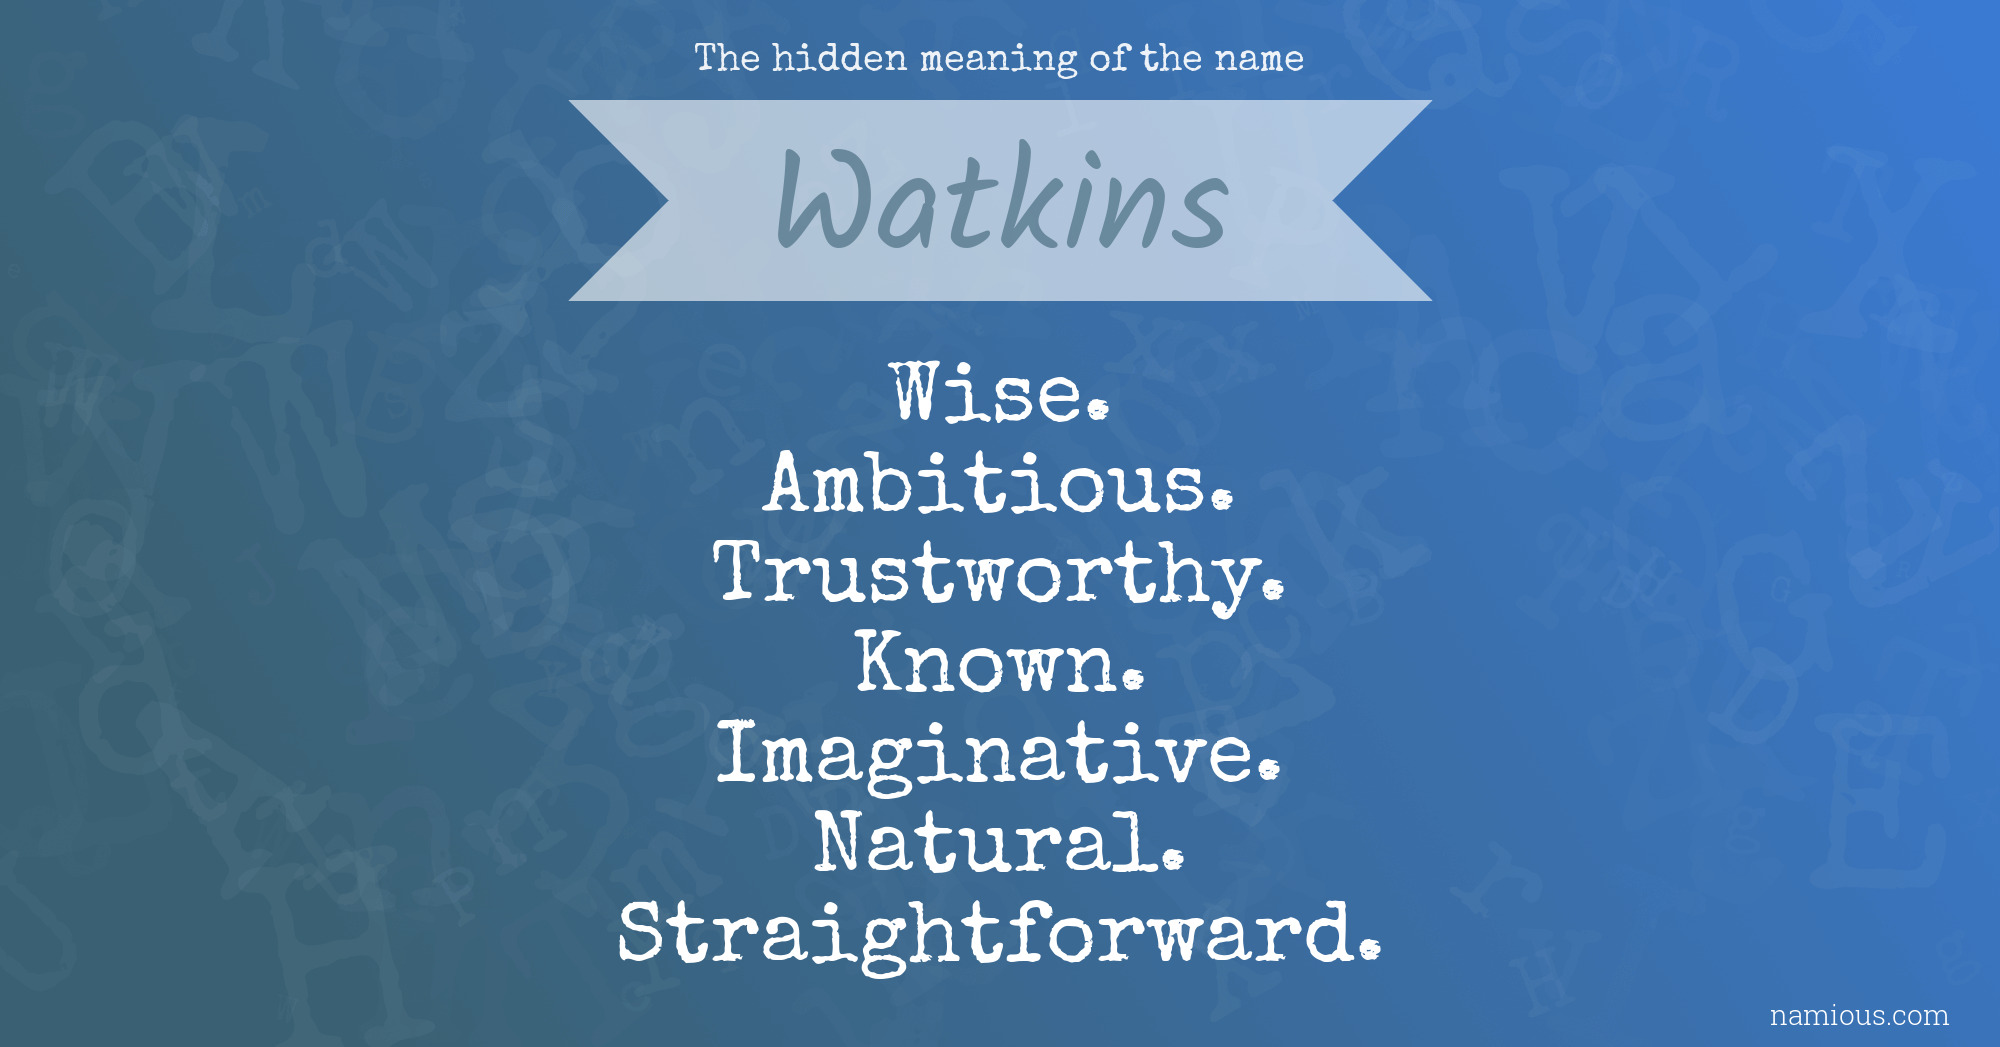 The hidden meaning of the name Watkins